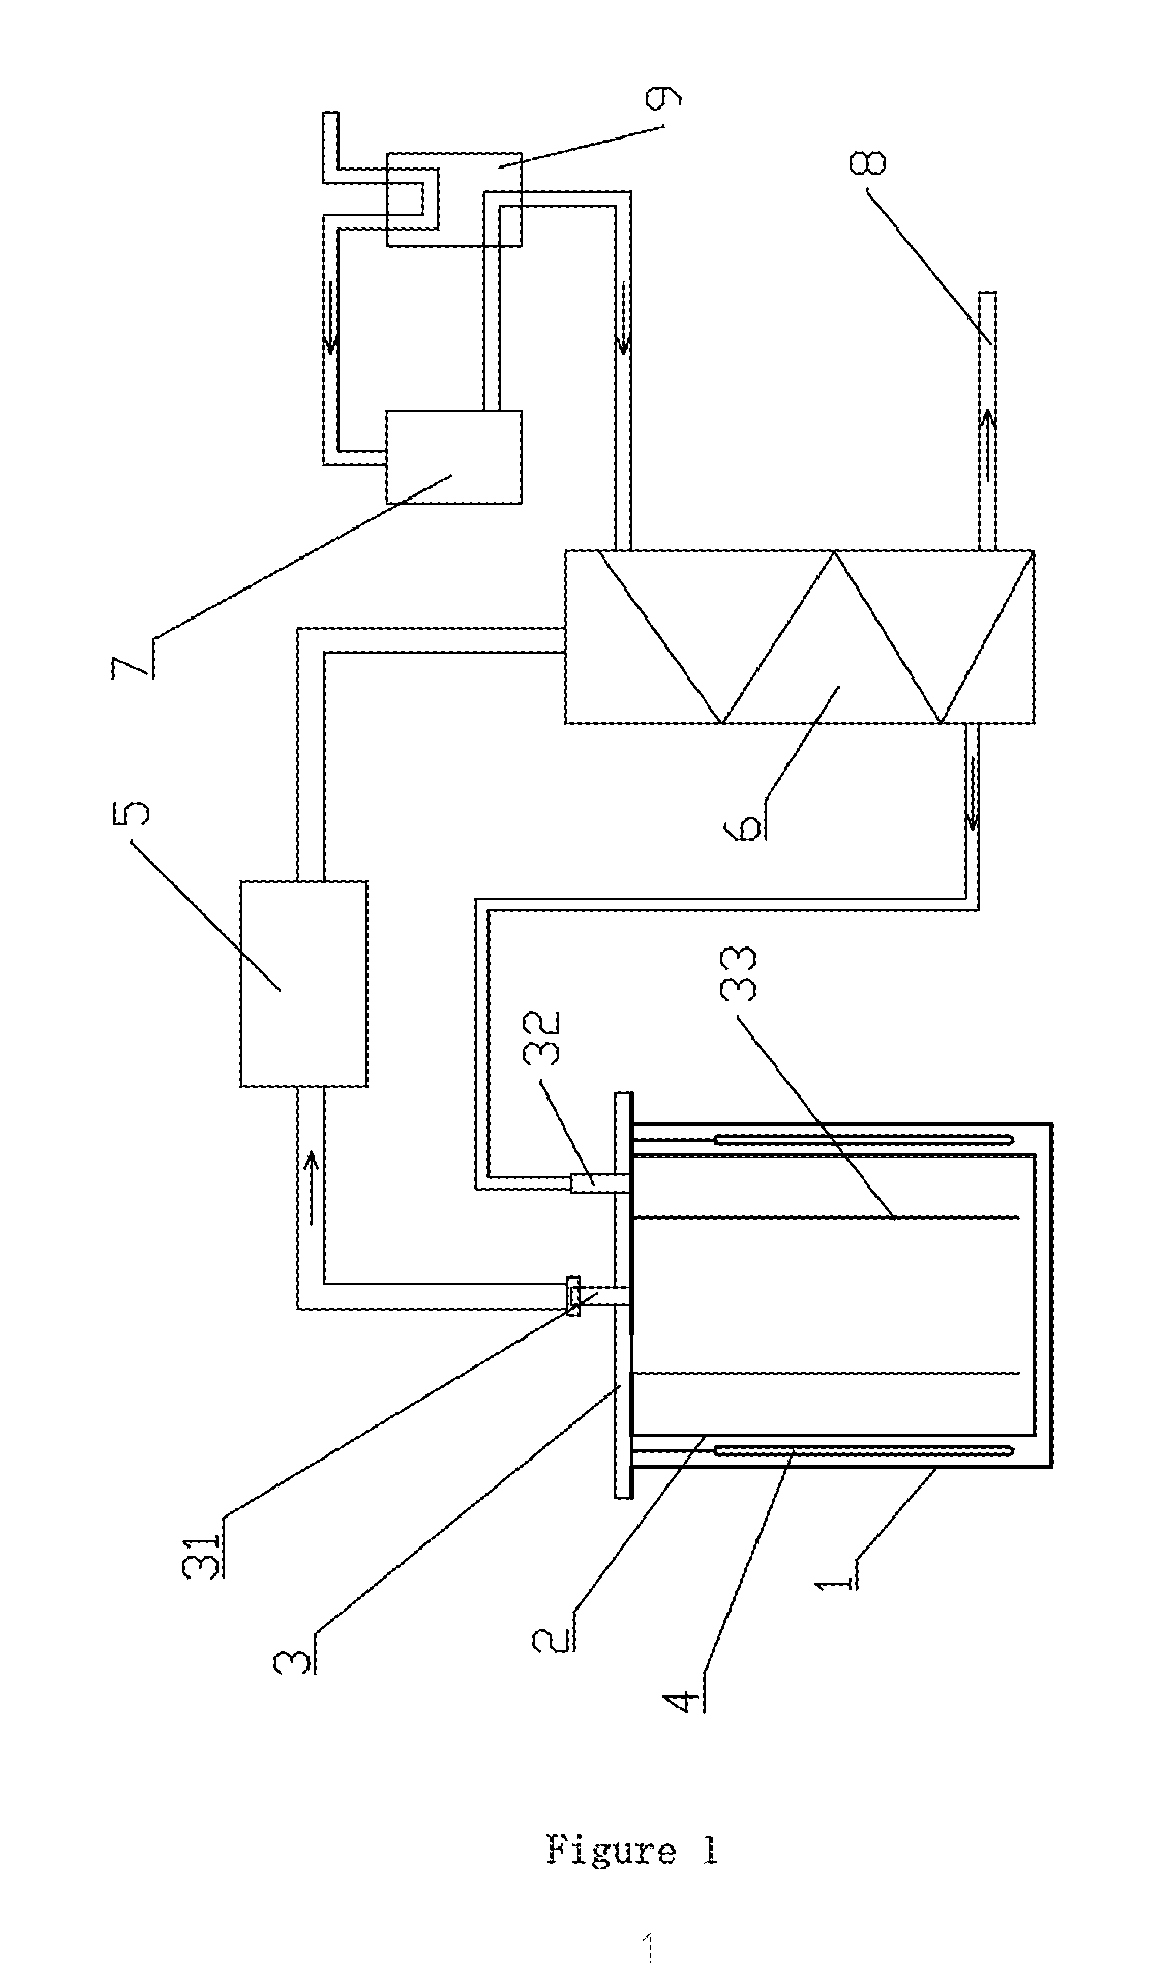 Method and System for Quickly Extracting Lithium Carbonate from Saline Lake Water